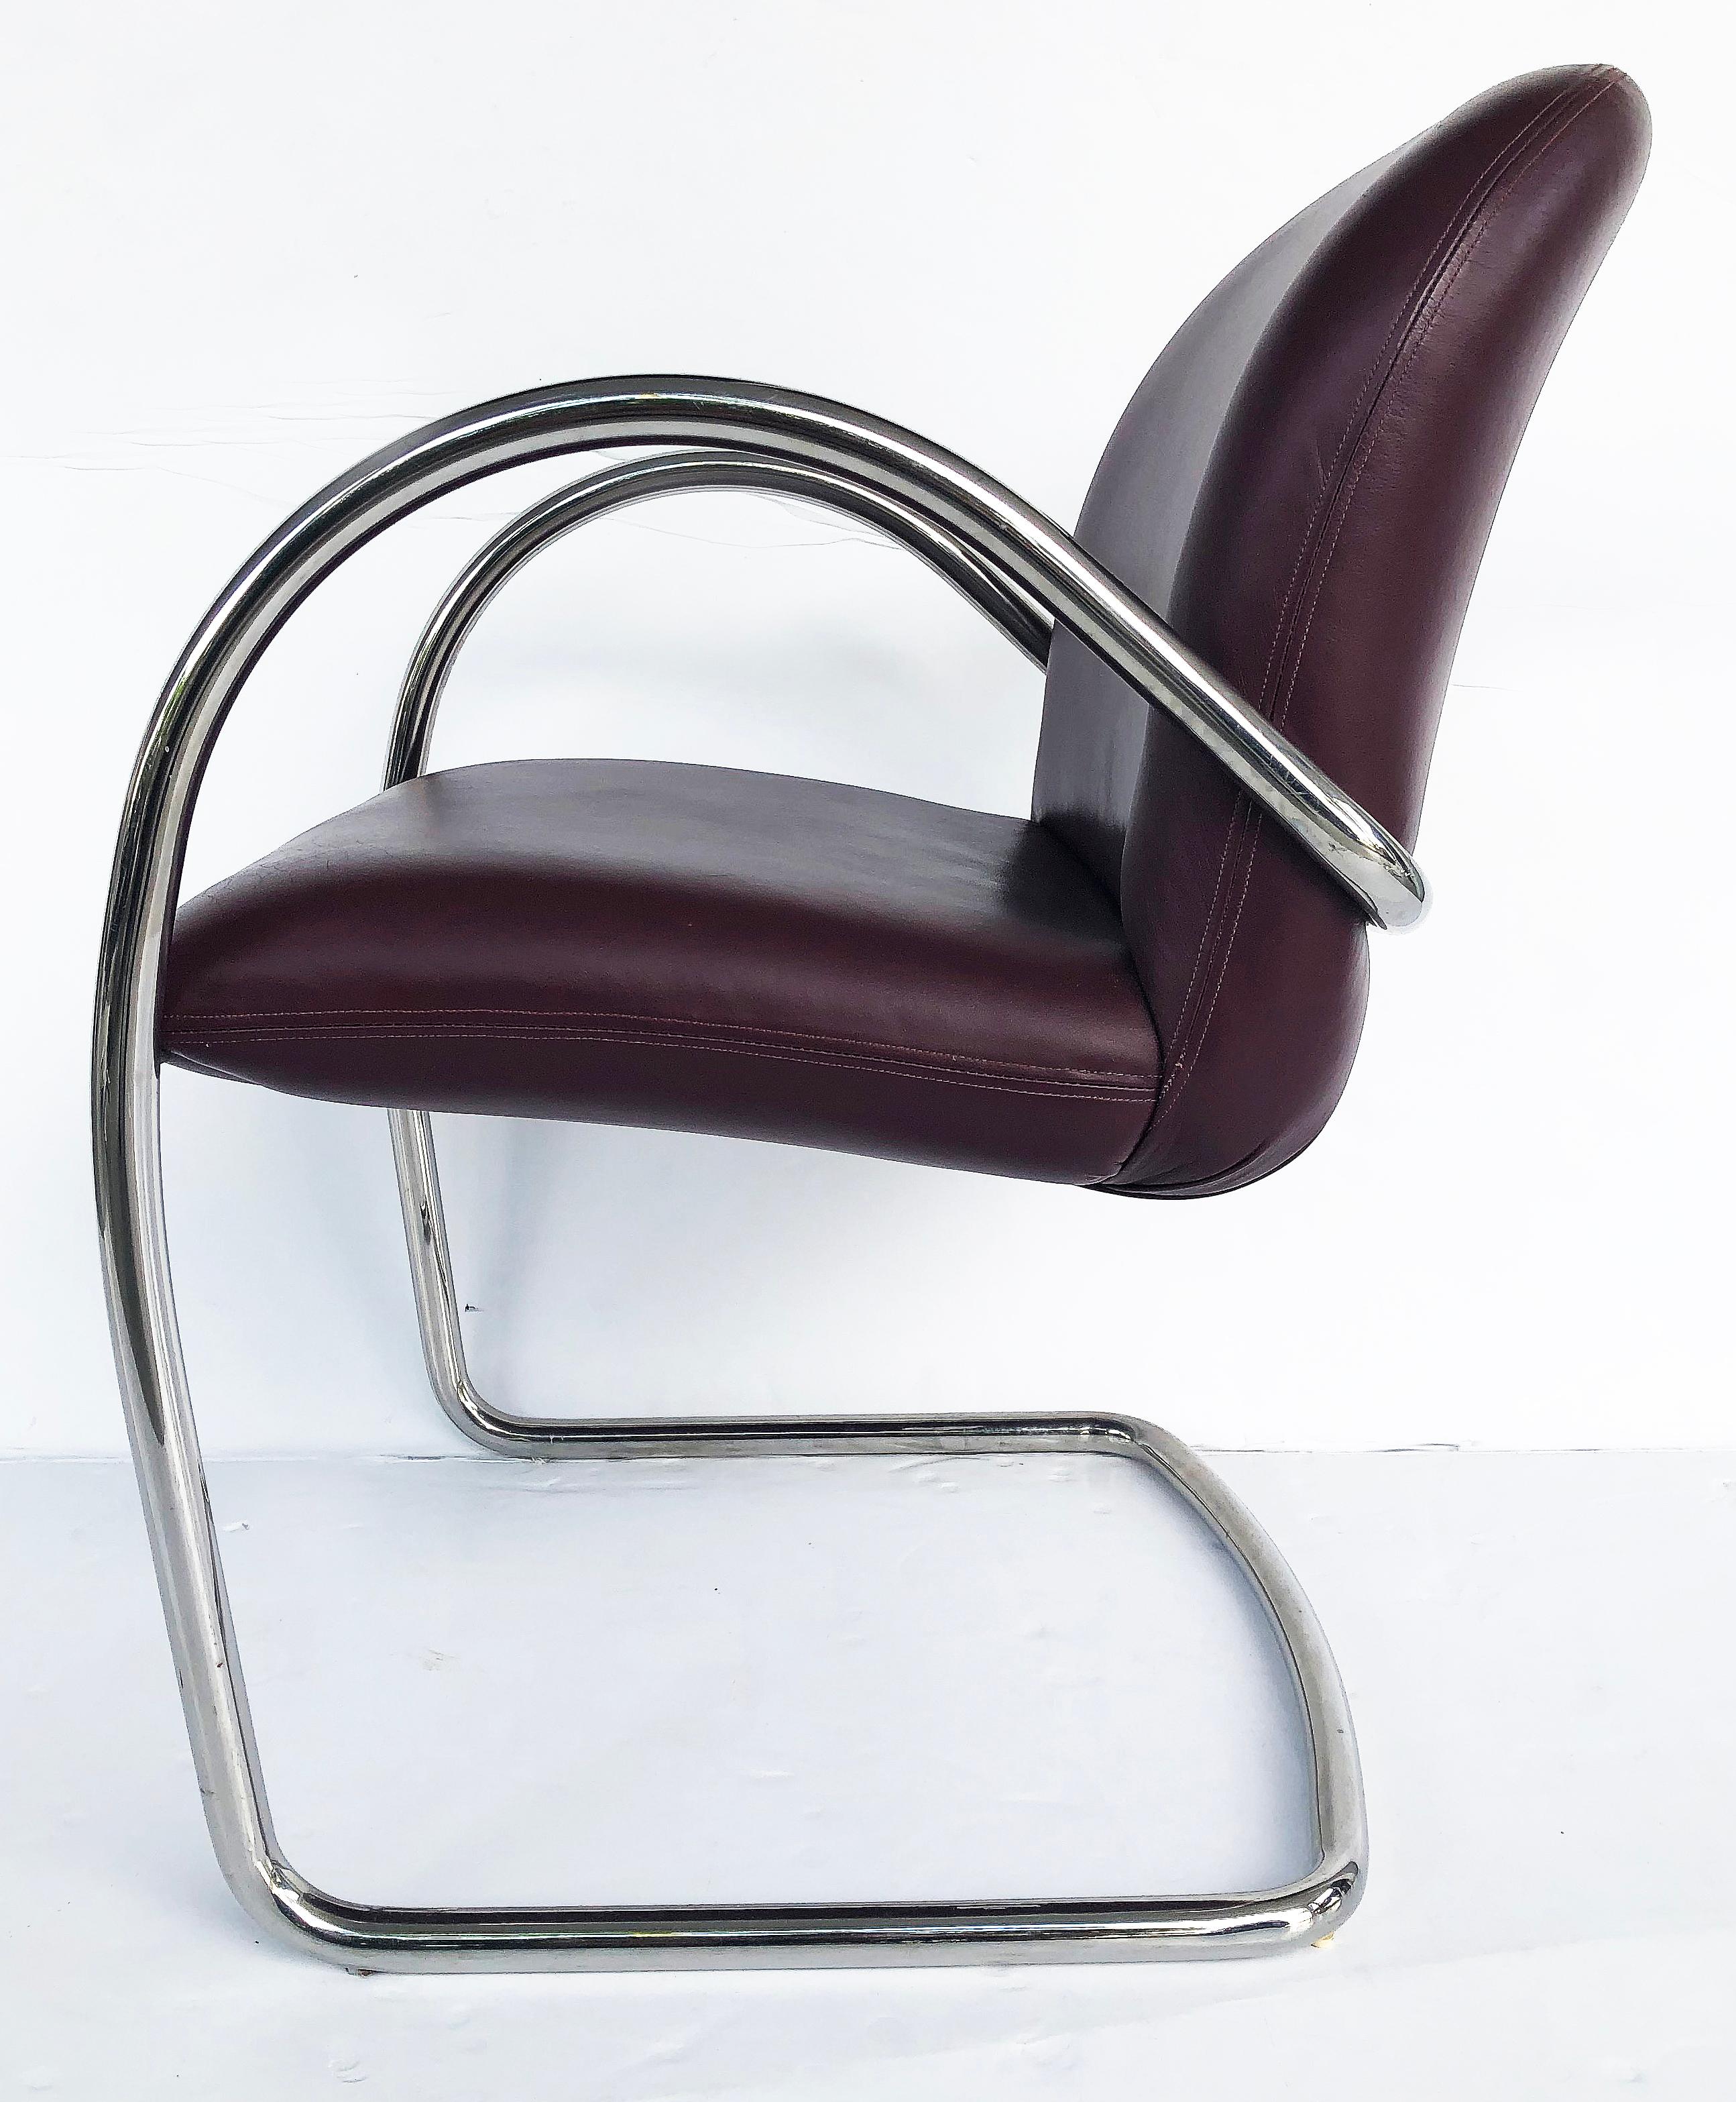 Brueton leather and stainless cantilevered chairs, set of 8 

Offered for sale is a set of eight (8) Brueton cantilevered chairs with tubular stainless steel frames and burgundy leather upholstery. The chairs have Brueton labels and production